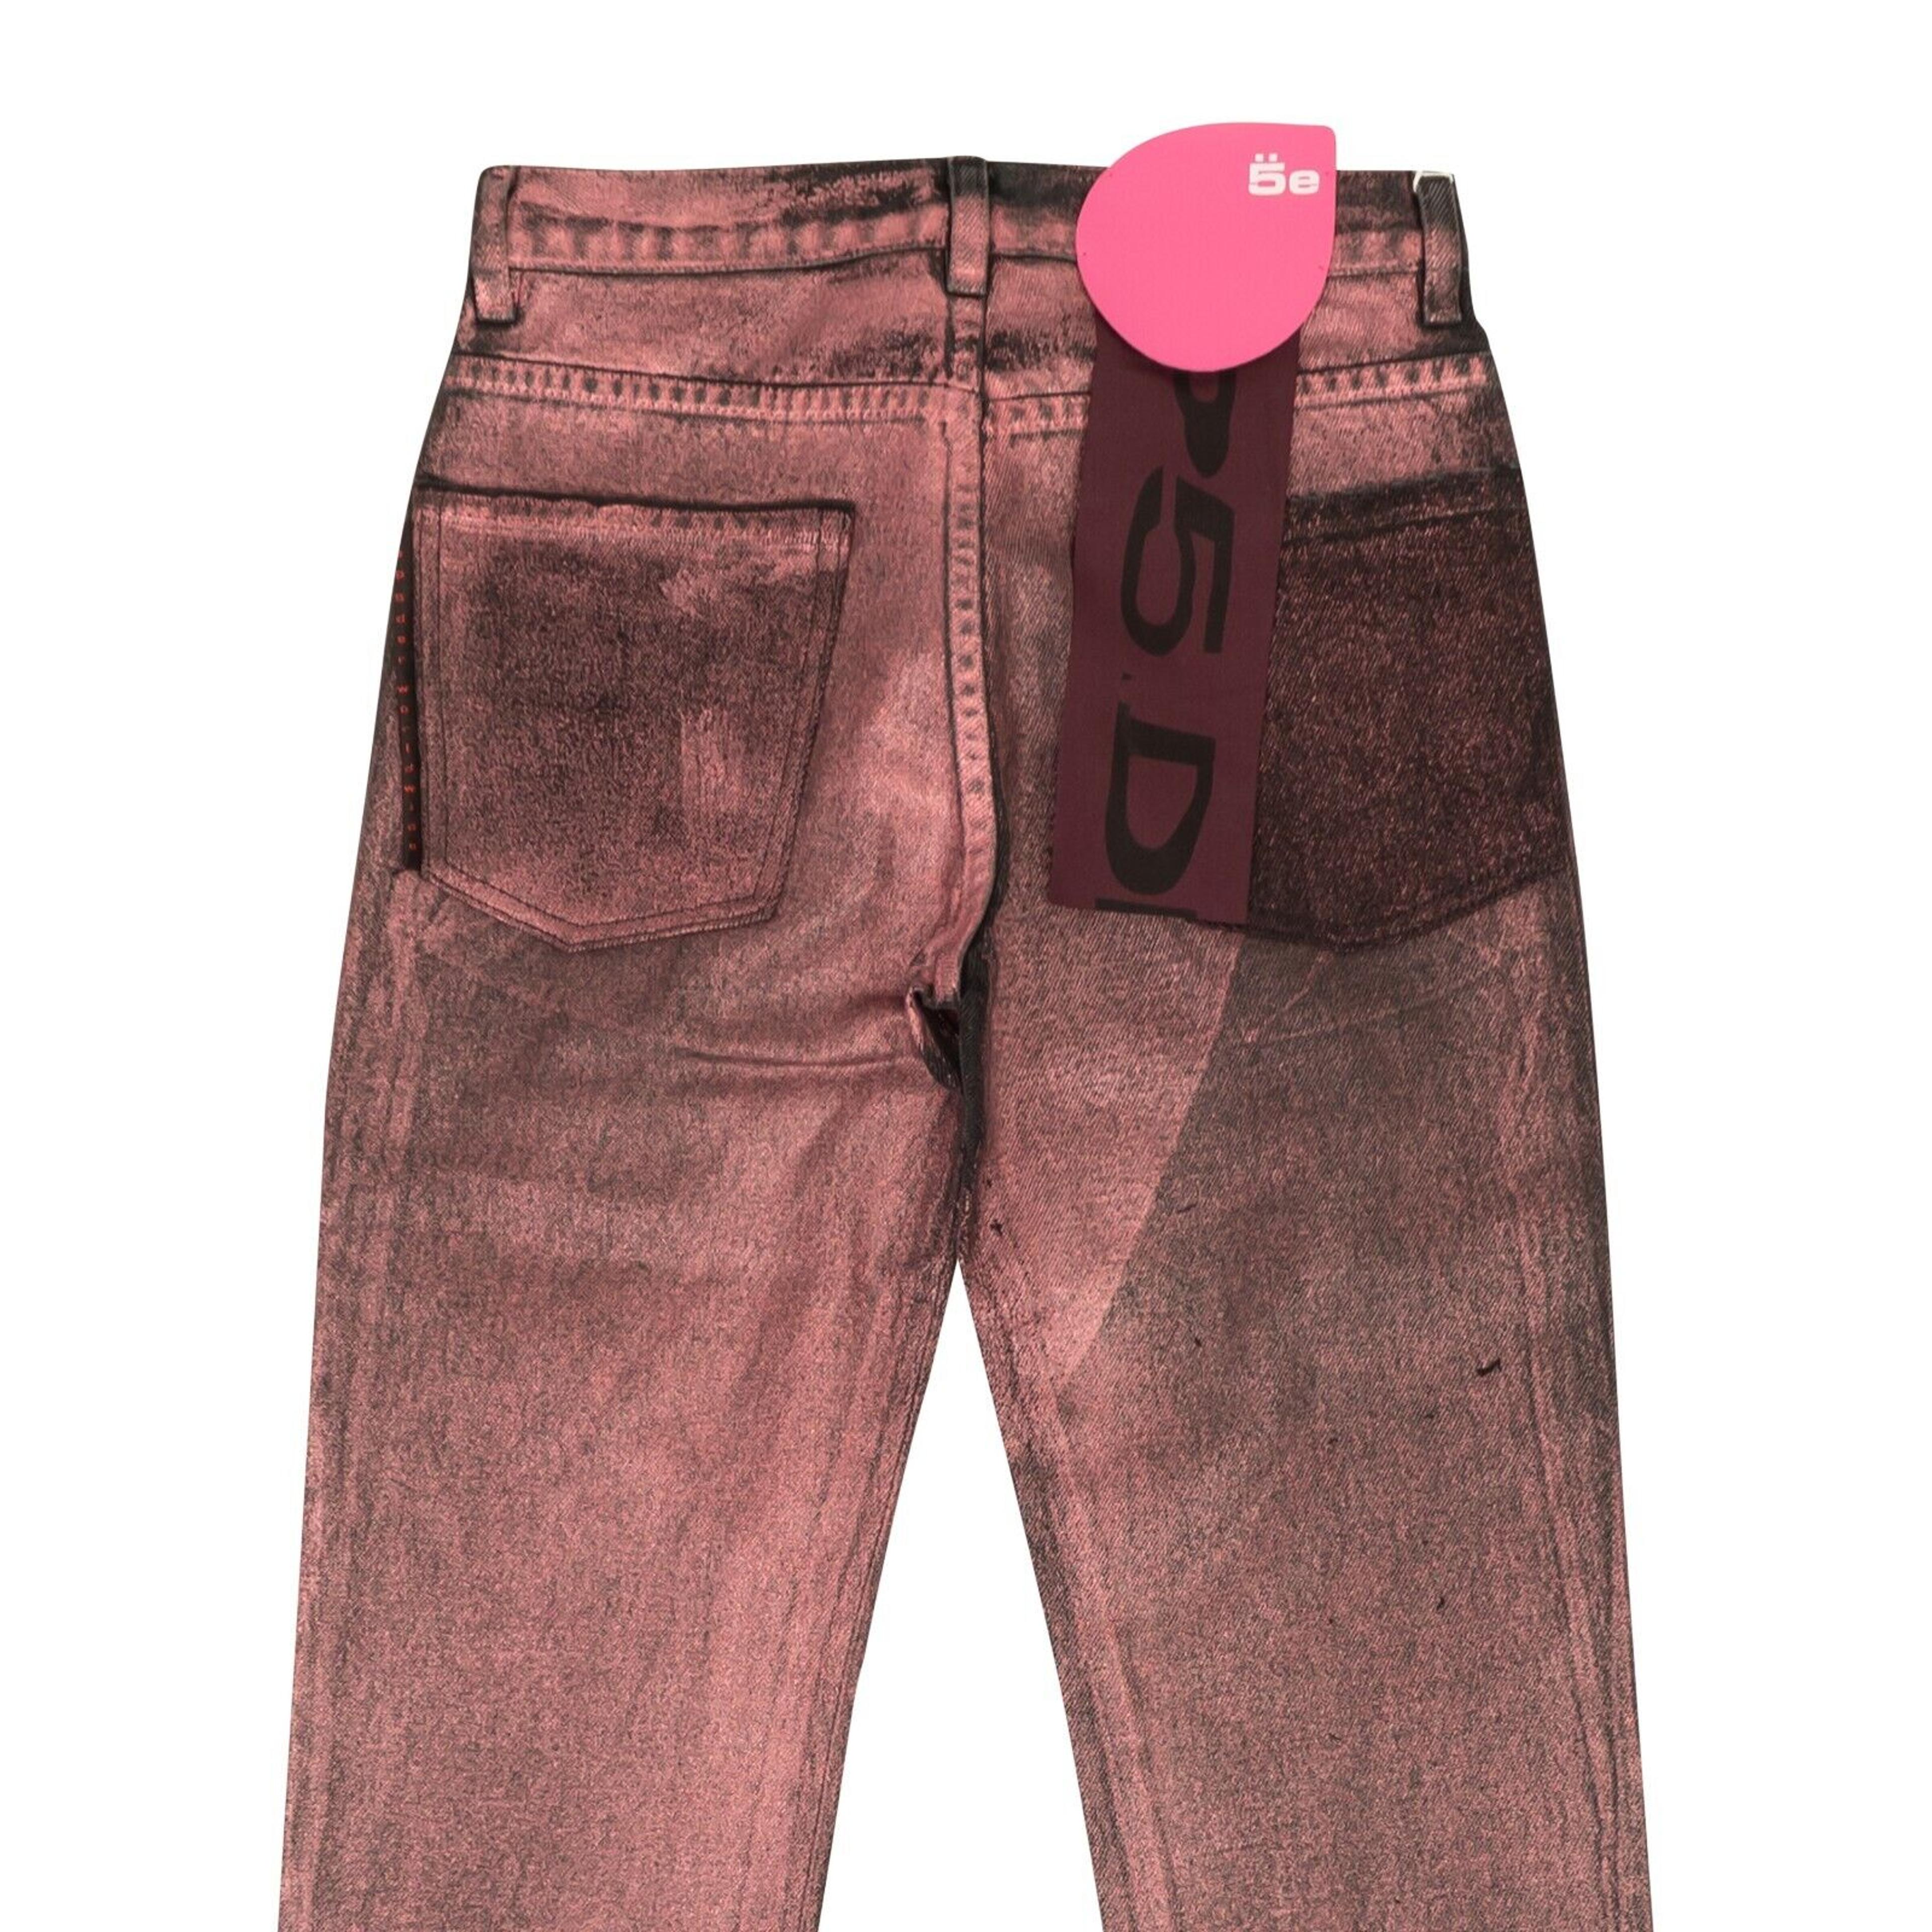 Alternate View 3 of Black And Pink Metallic Wash Jeans